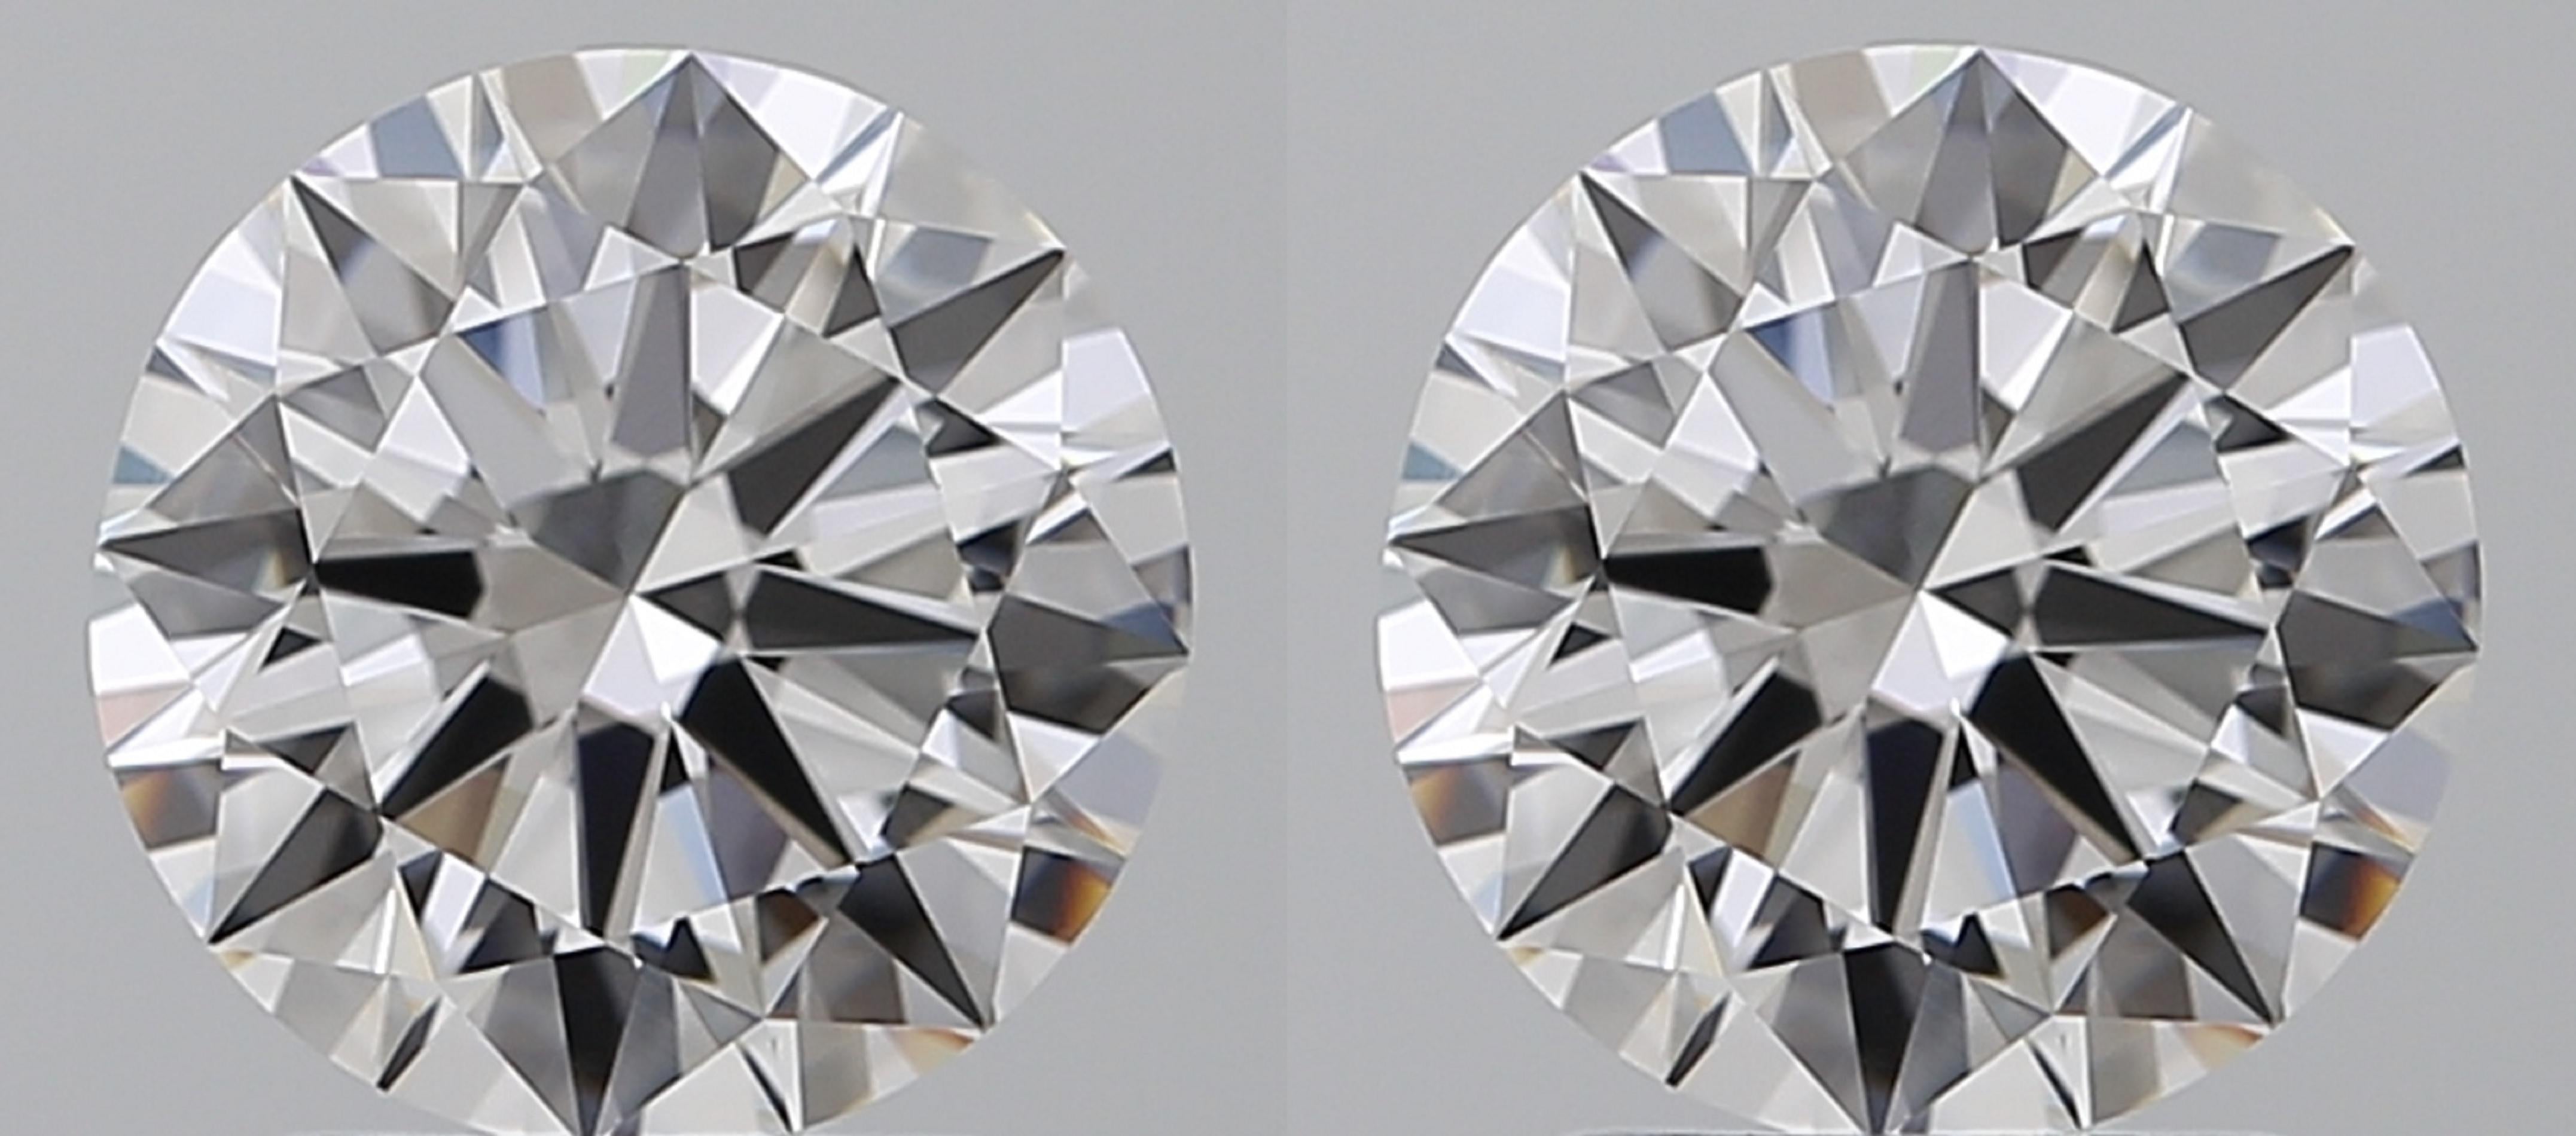 EXCEPTIONAL GIA Certified D VVS1 Clarity Round Brilliant Cut Diamond Studs